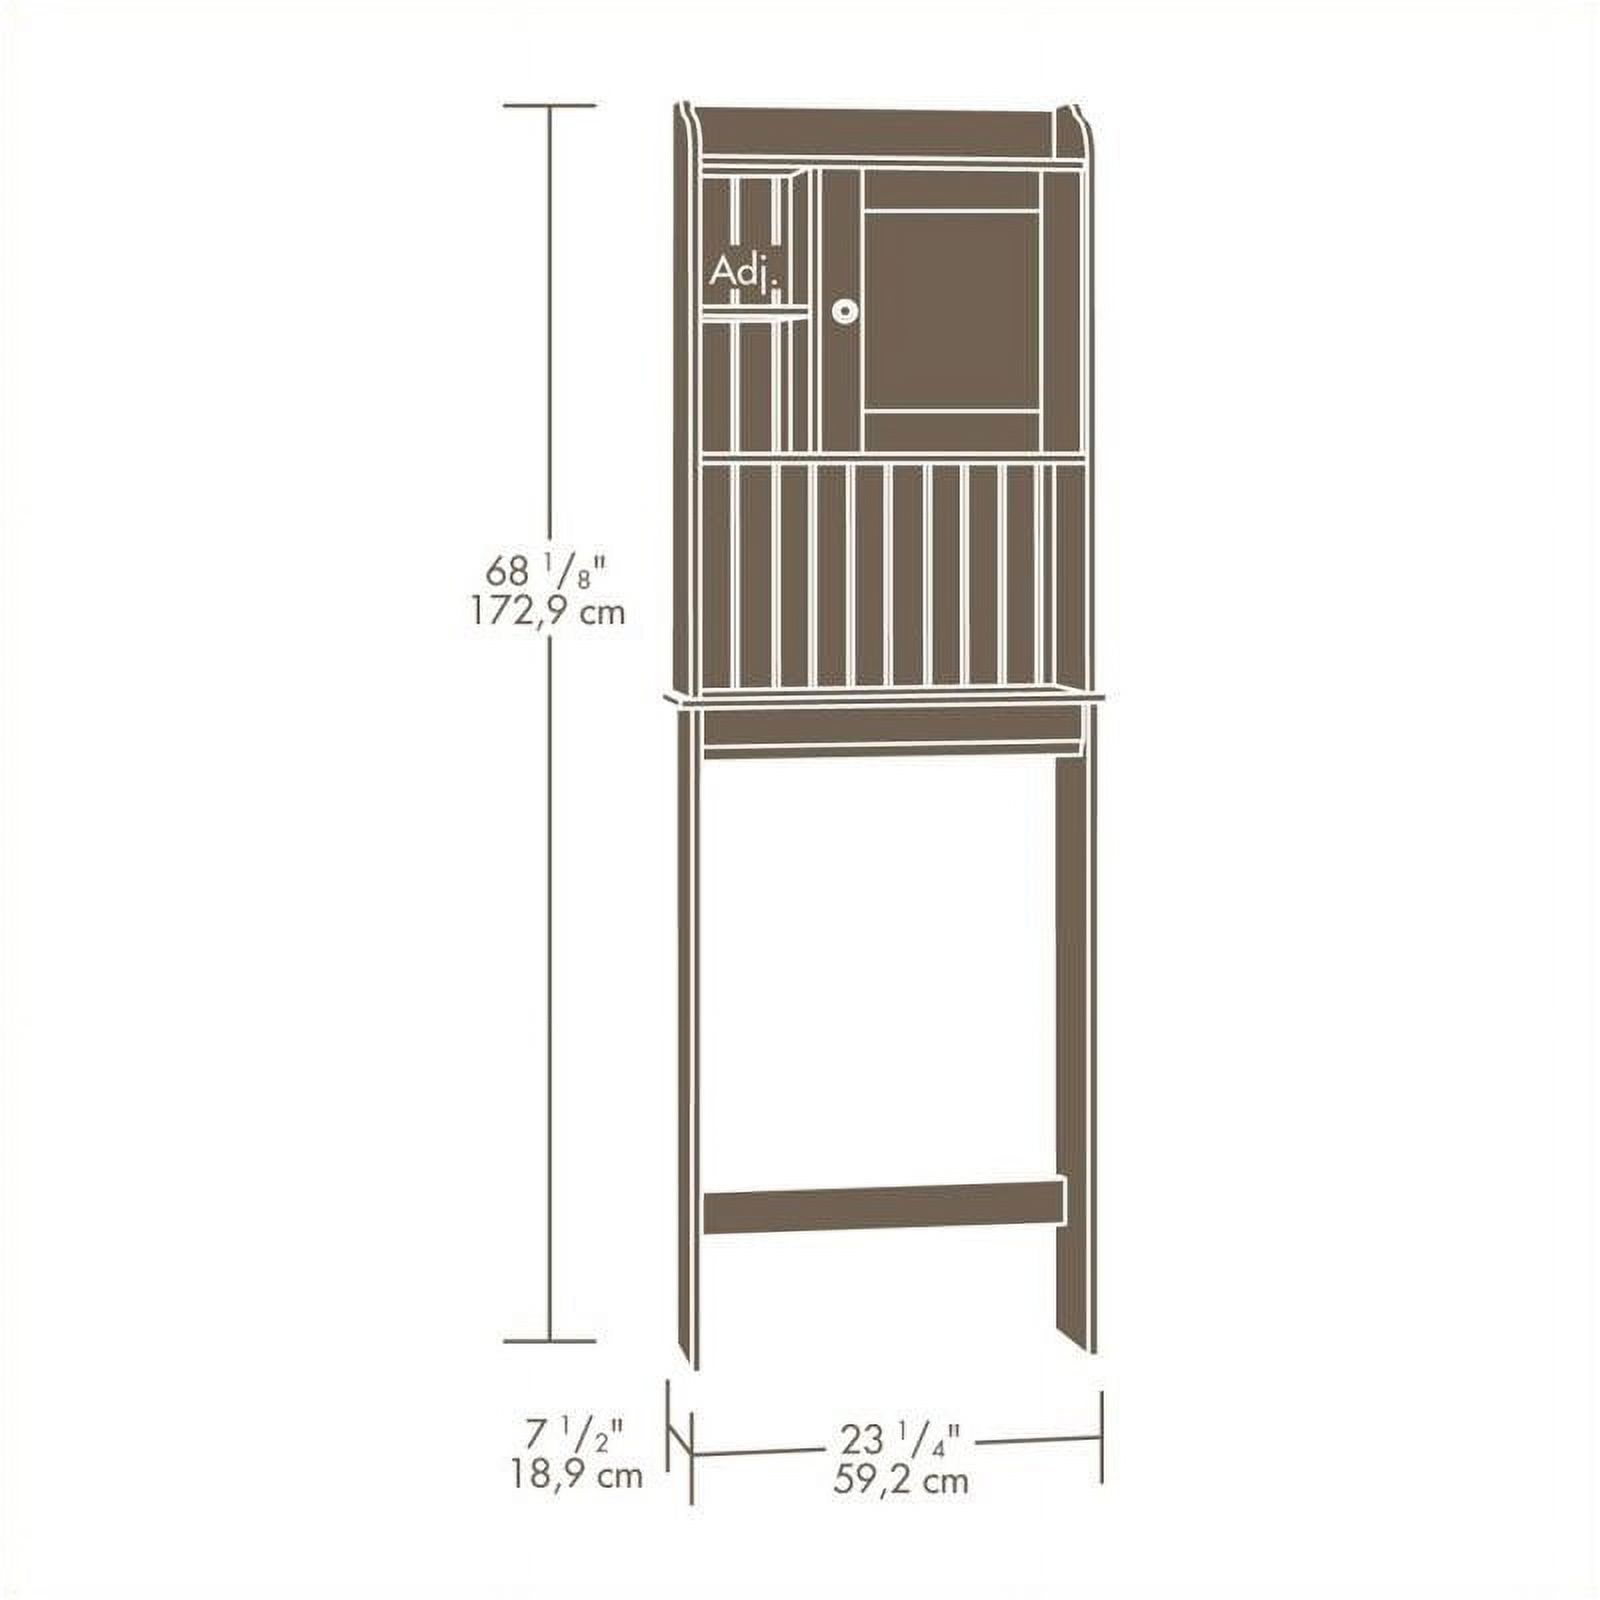 Pemberly Row Over-the-Toilet Etagere, Space-Saver Bathroom Cabinet with Adjustable Shelf in Soft White - image 4 of 4